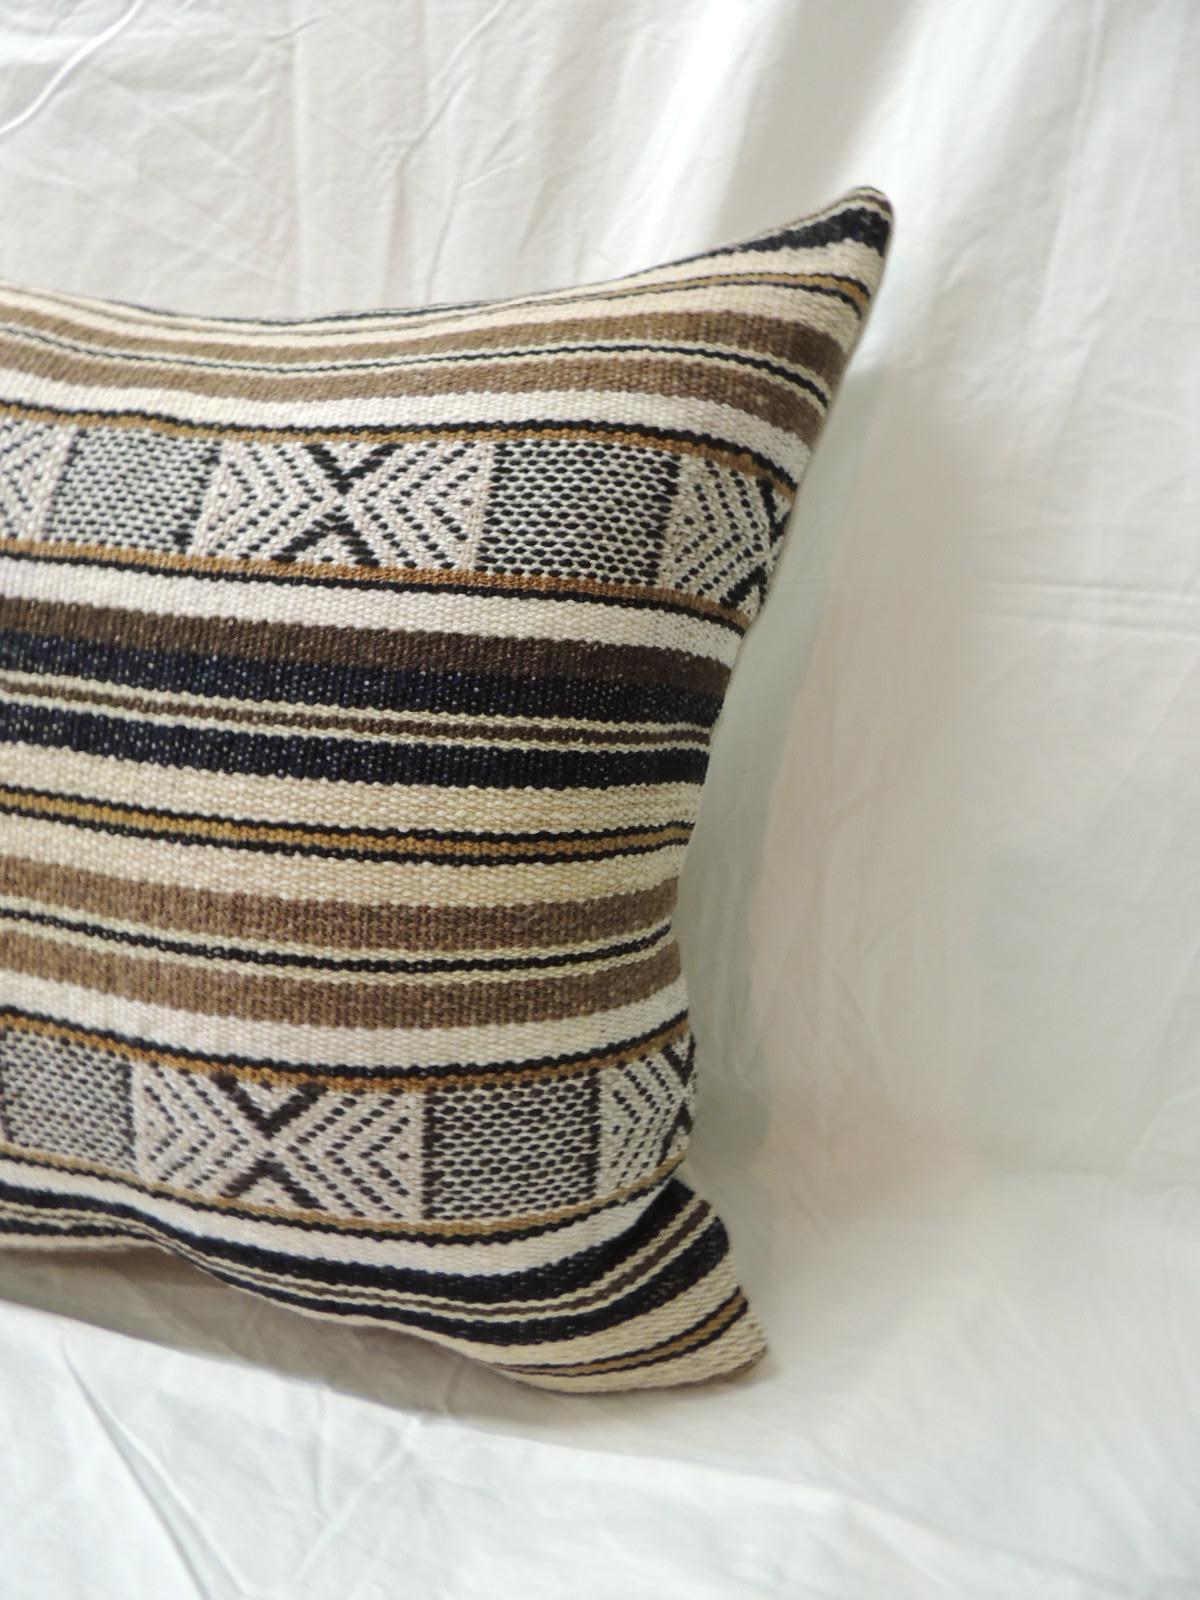 Pair of black and brown woven square decorative pillows with sand color linen backings.
Decorative pillow handcrafted and designed in the USA. Closure by stitch (no zipper closure) with custom made pillow insert.
Size: 20